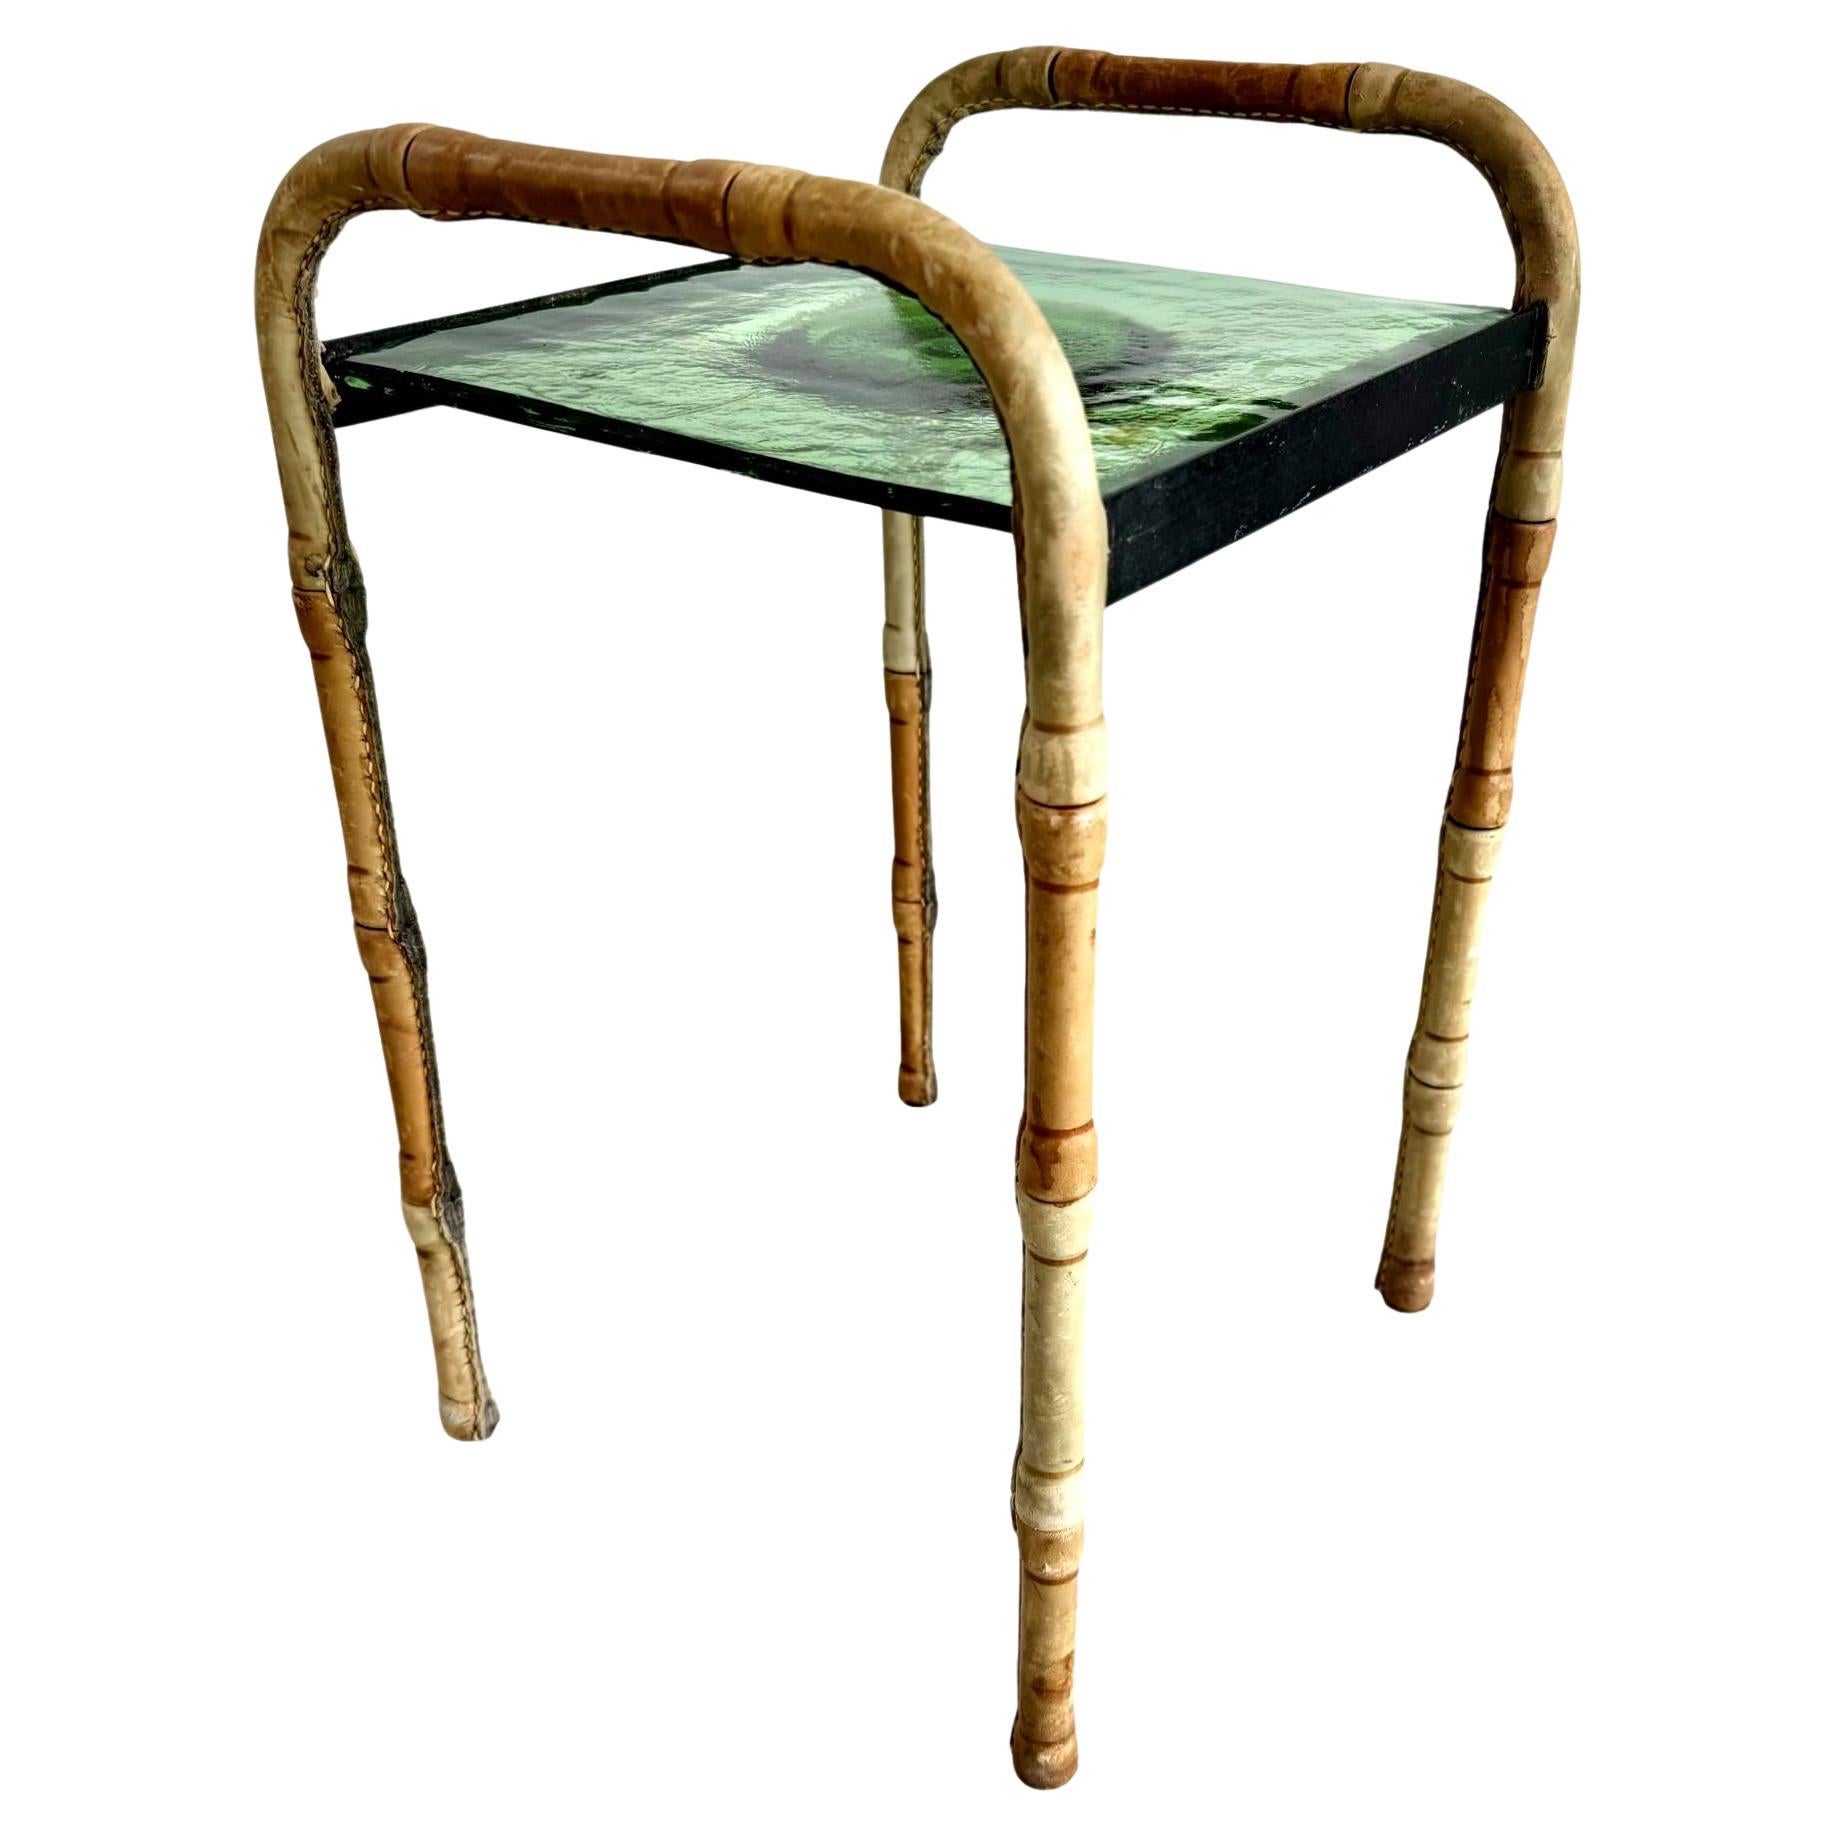 Jacques Adnet Leather and Glass Side Table and Catchall, 1950s France For Sale